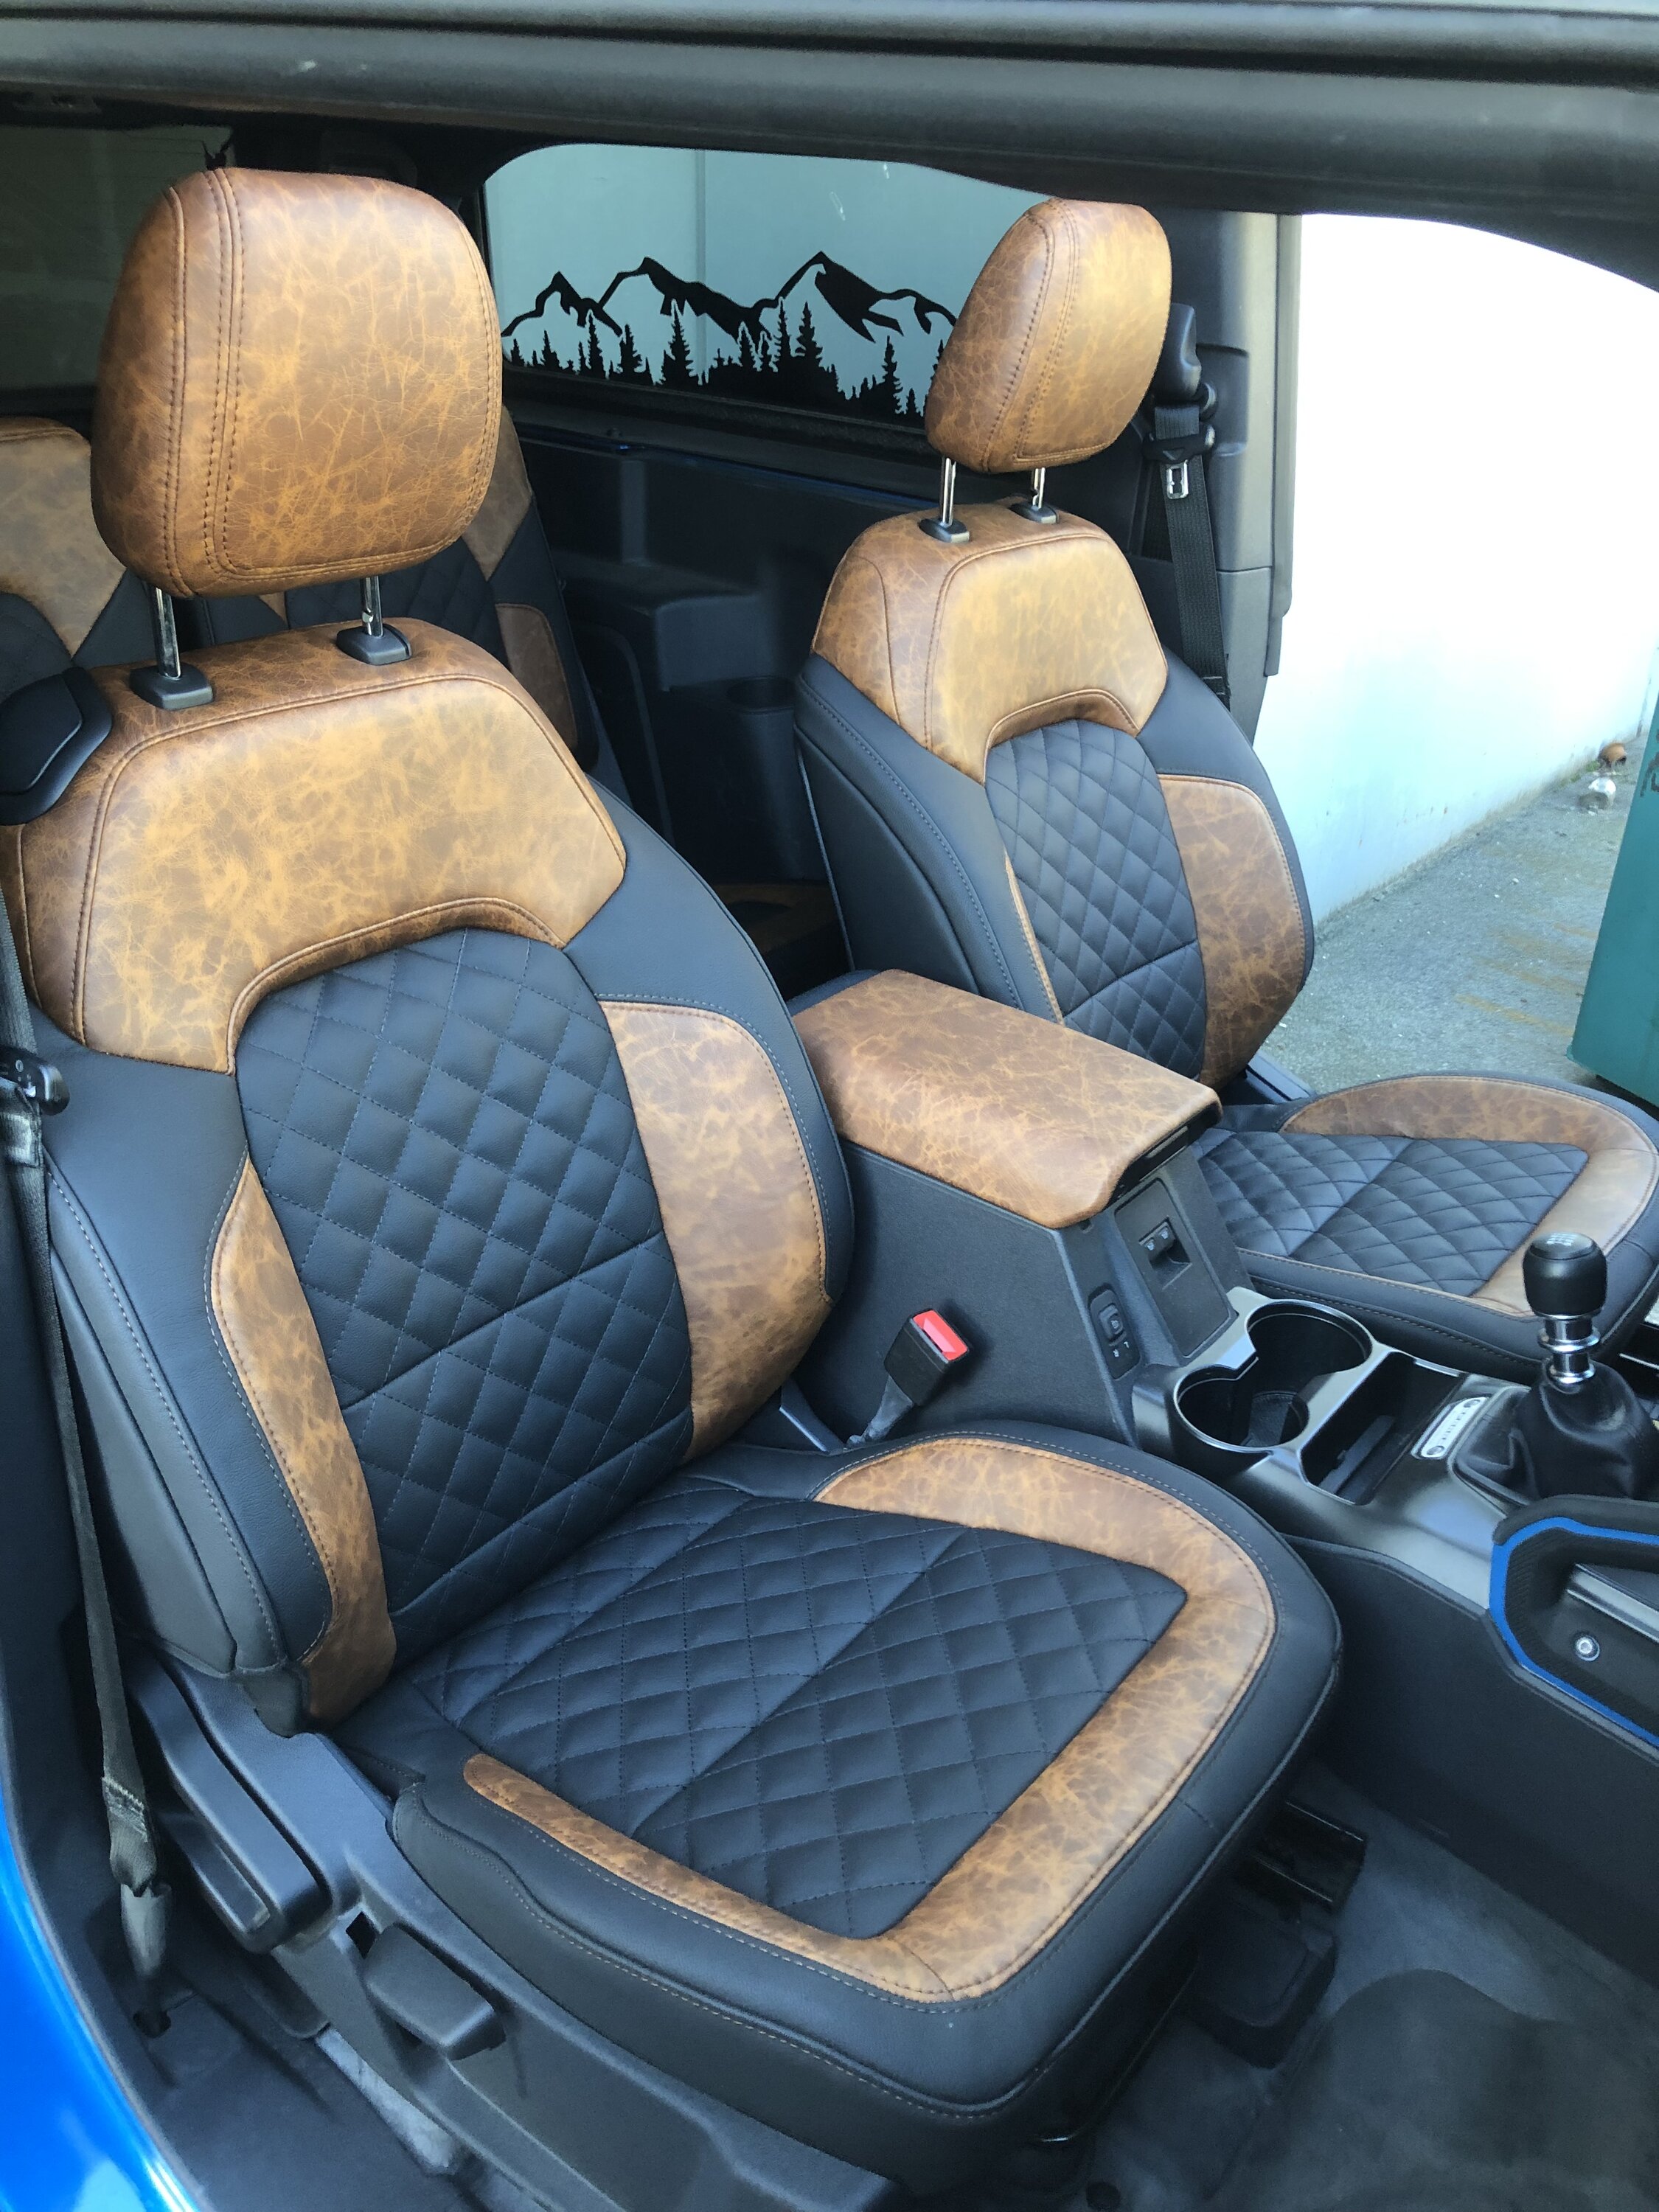 Ford Bronco Custom Interior & Seats Inspired by Pre-Production Bronco 3F57D065-AE5B-4C86-AE97-69CD82449F3D